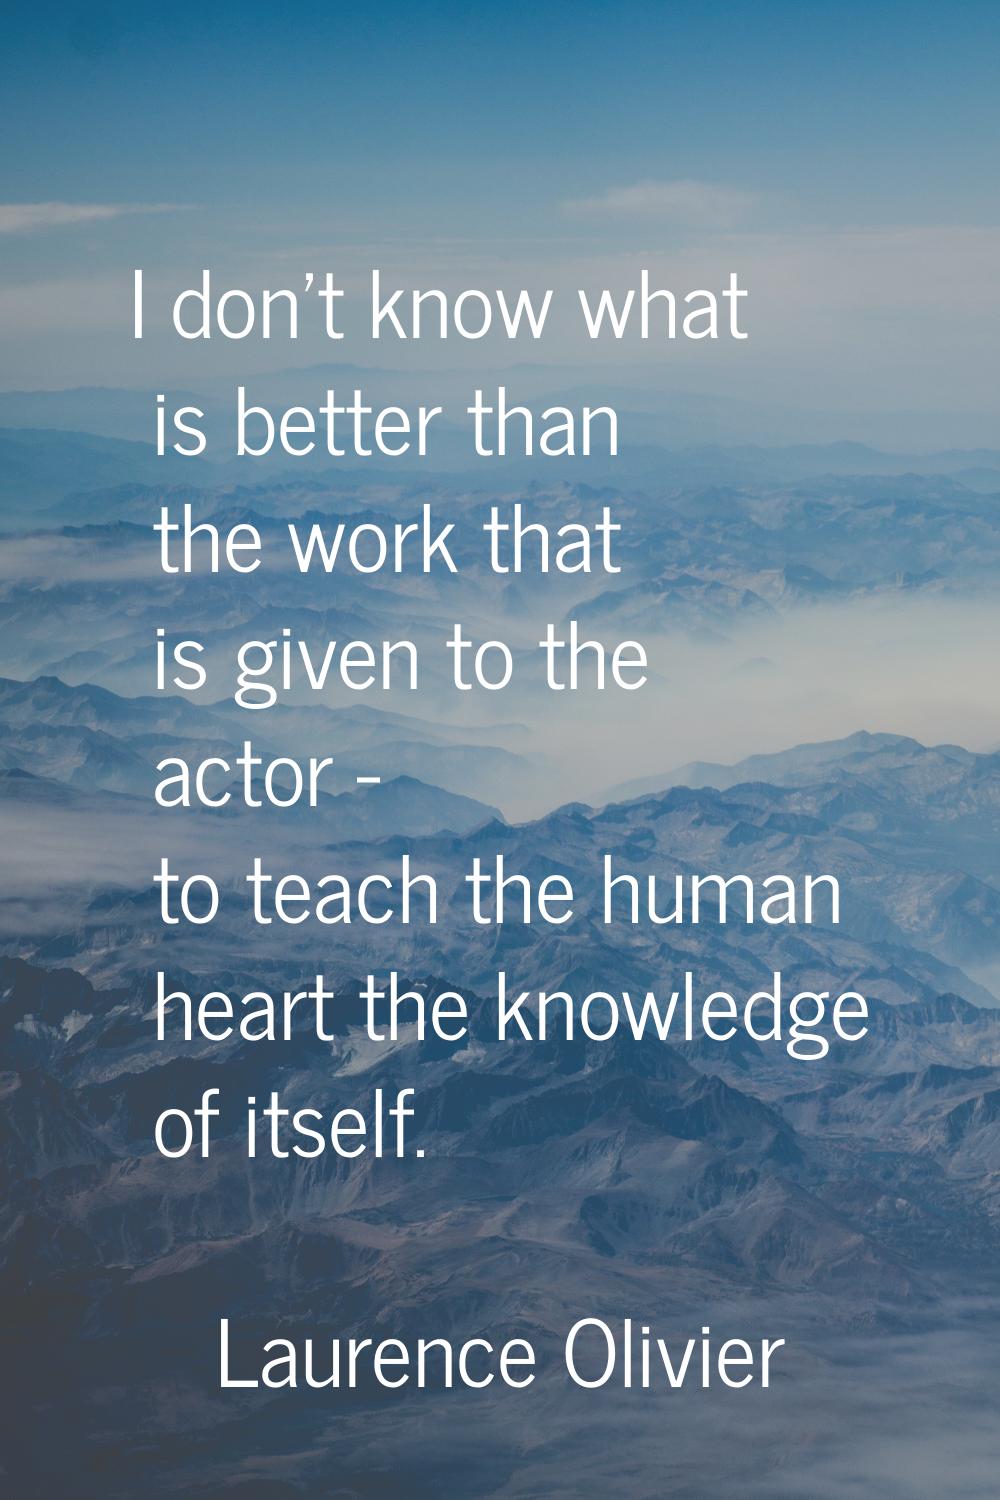 I don't know what is better than the work that is given to the actor - to teach the human heart the